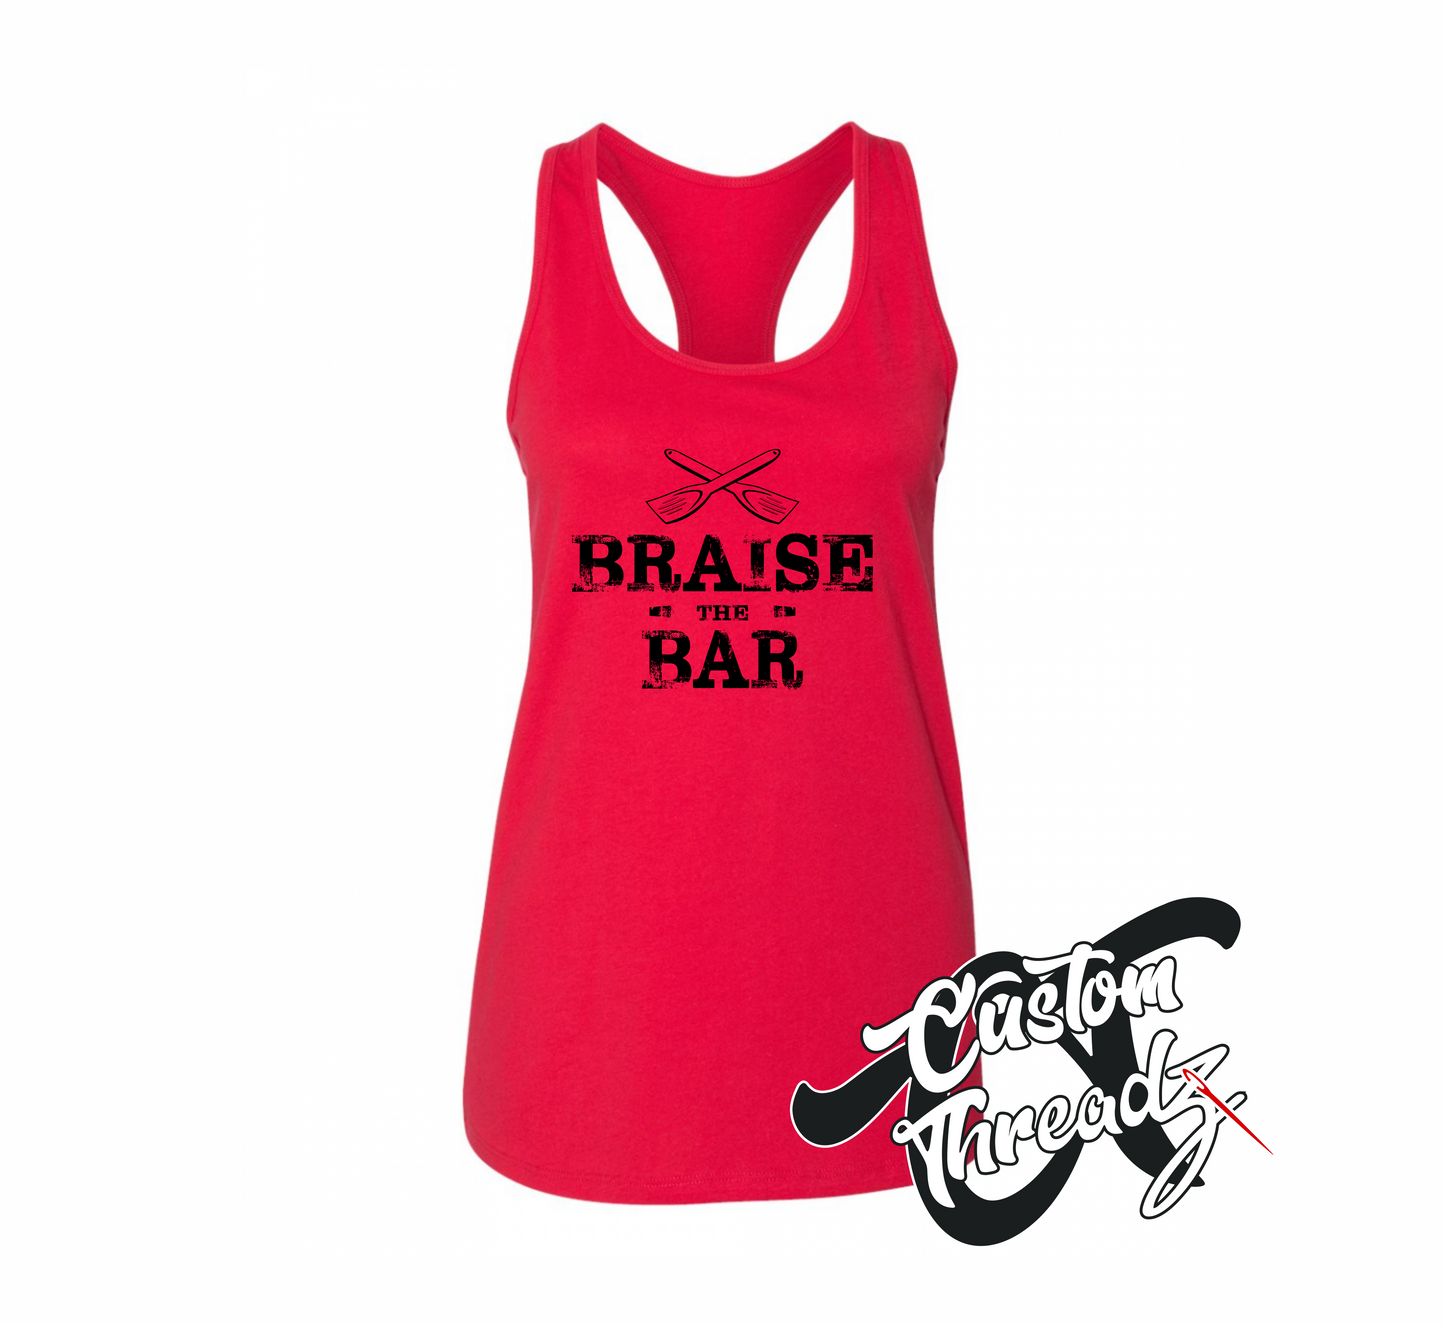 red womens tank top with braise the bar summertime DTG printed design